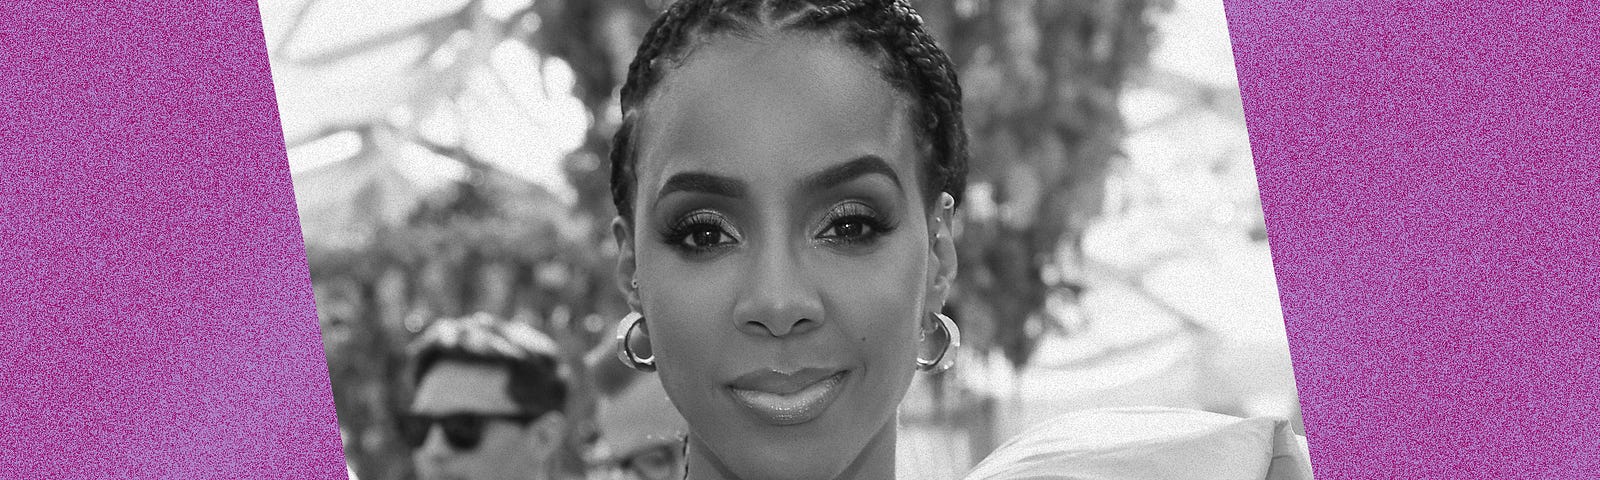 Black and white photo of Kelly Rowland against a violet background.